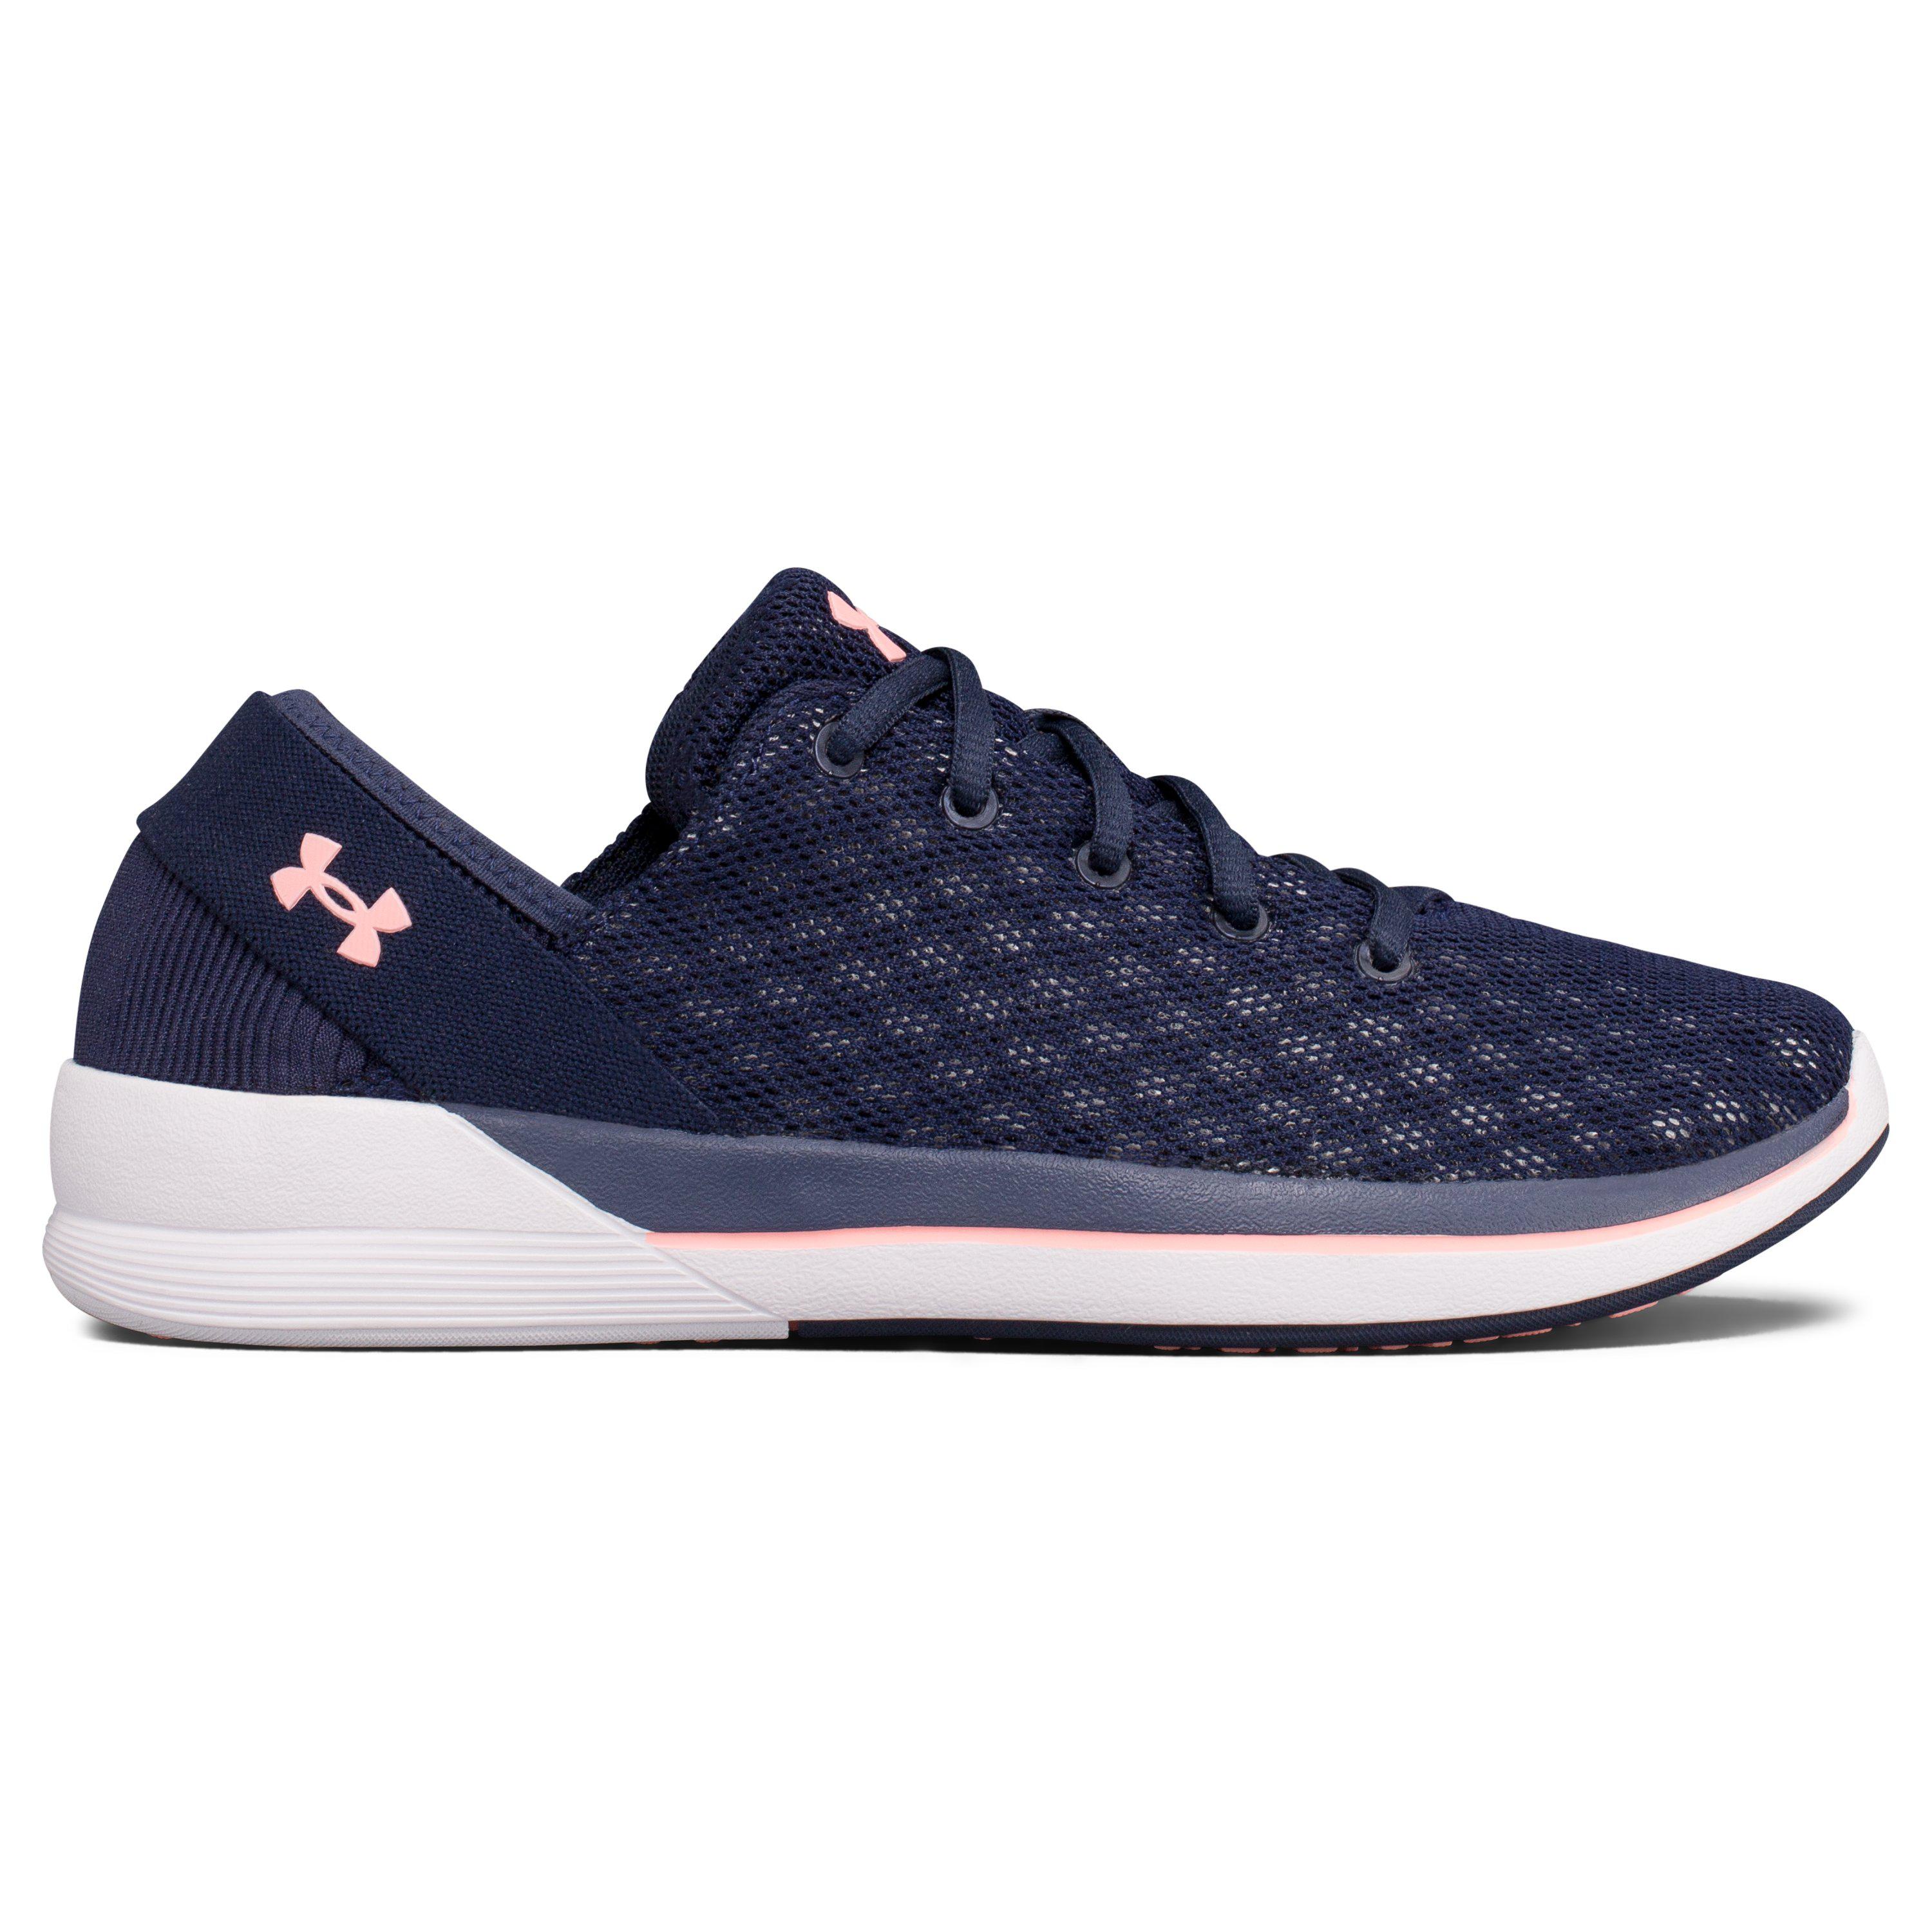 Under Armour Women's Ua Rotation Training Shoes in Blue | Lyst